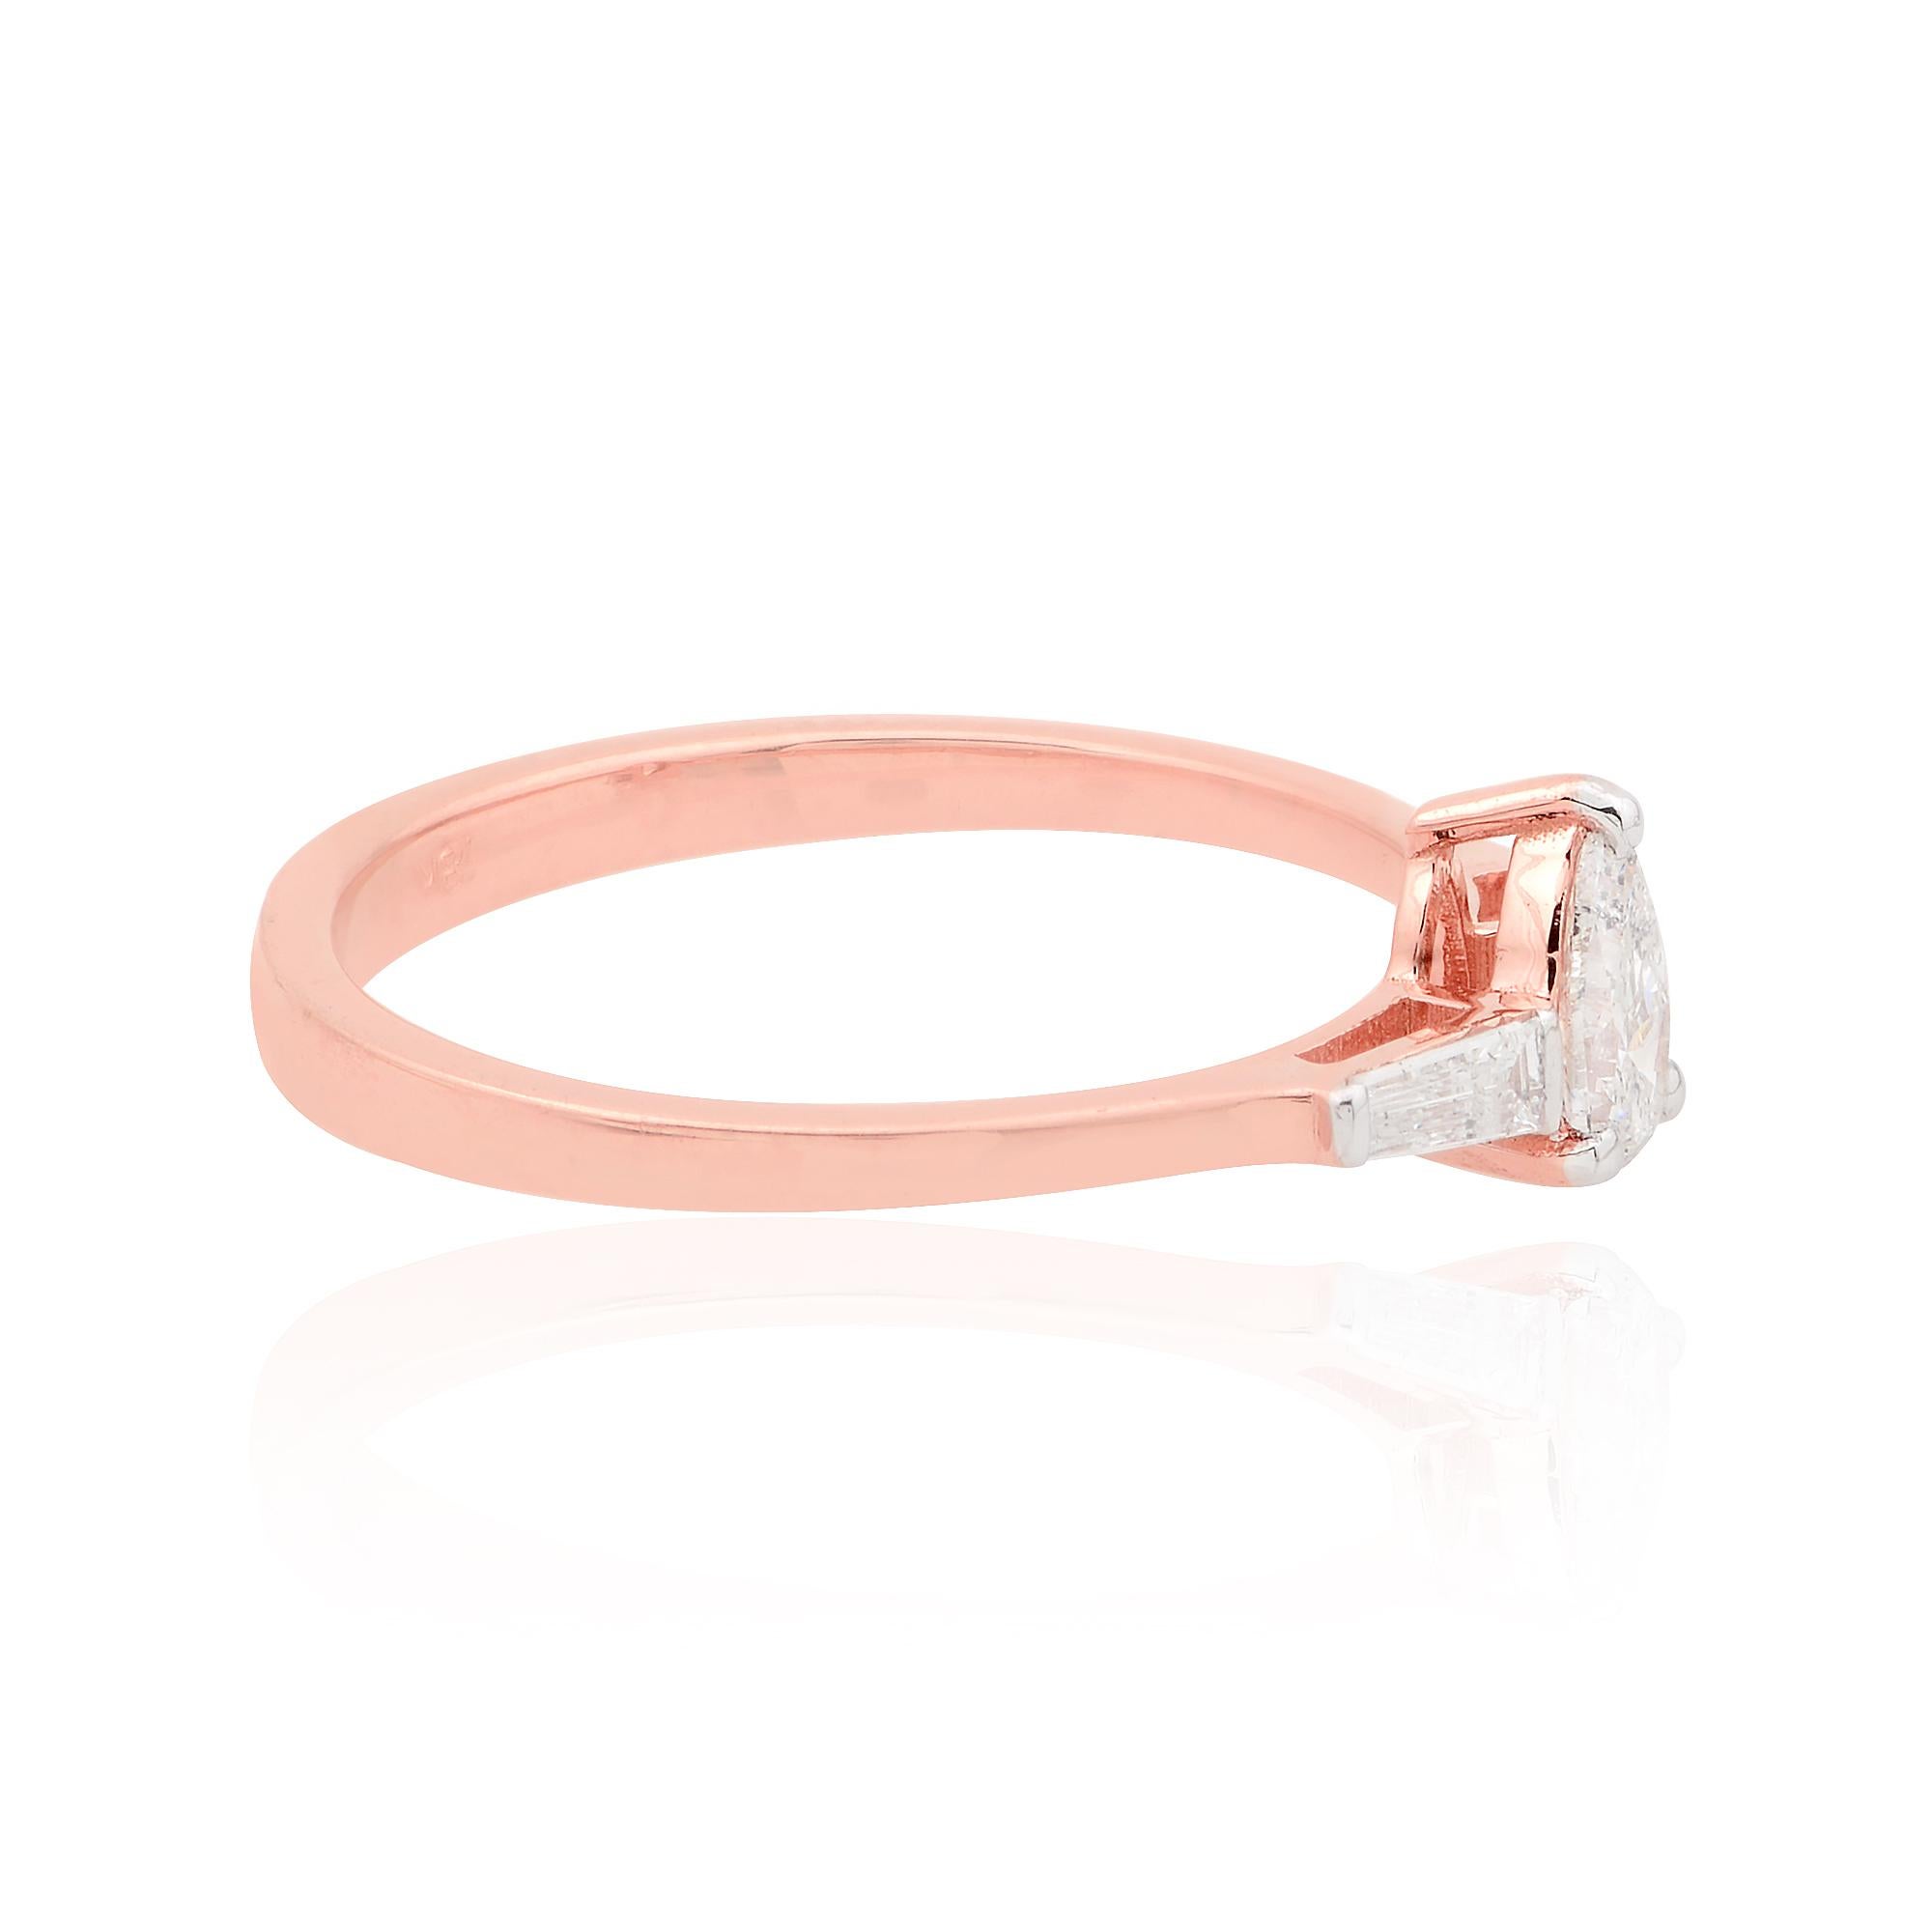 For Sale:  0.48 Carat Pear Baguette Diamond Band Ring Solid 18k Rose Gold Handmade Jewelry 3